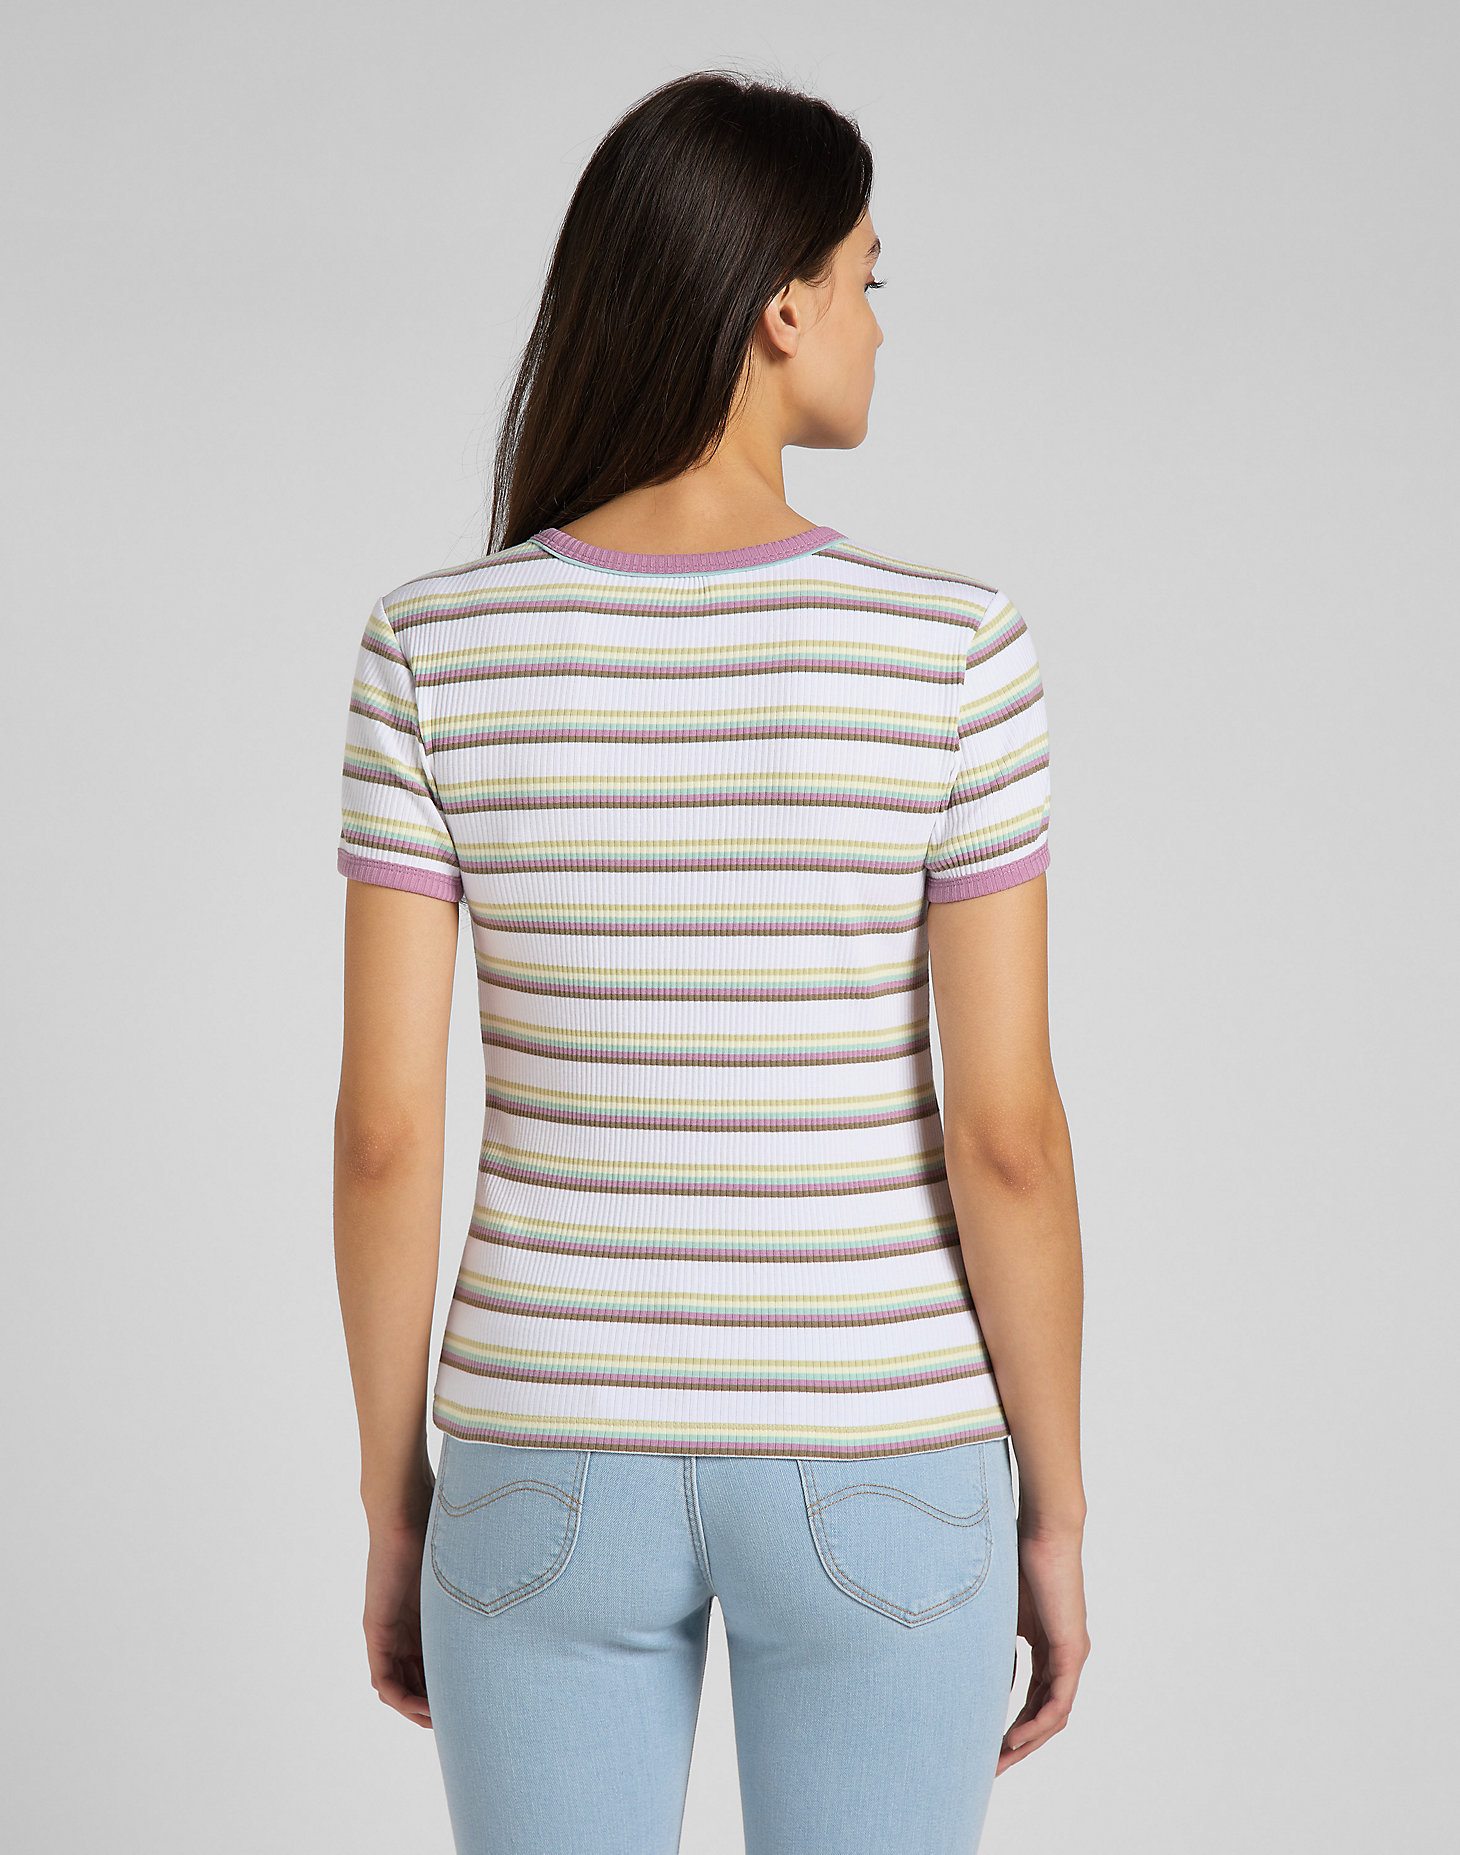 Striped Ribbed Tee in Plum alternative view 1